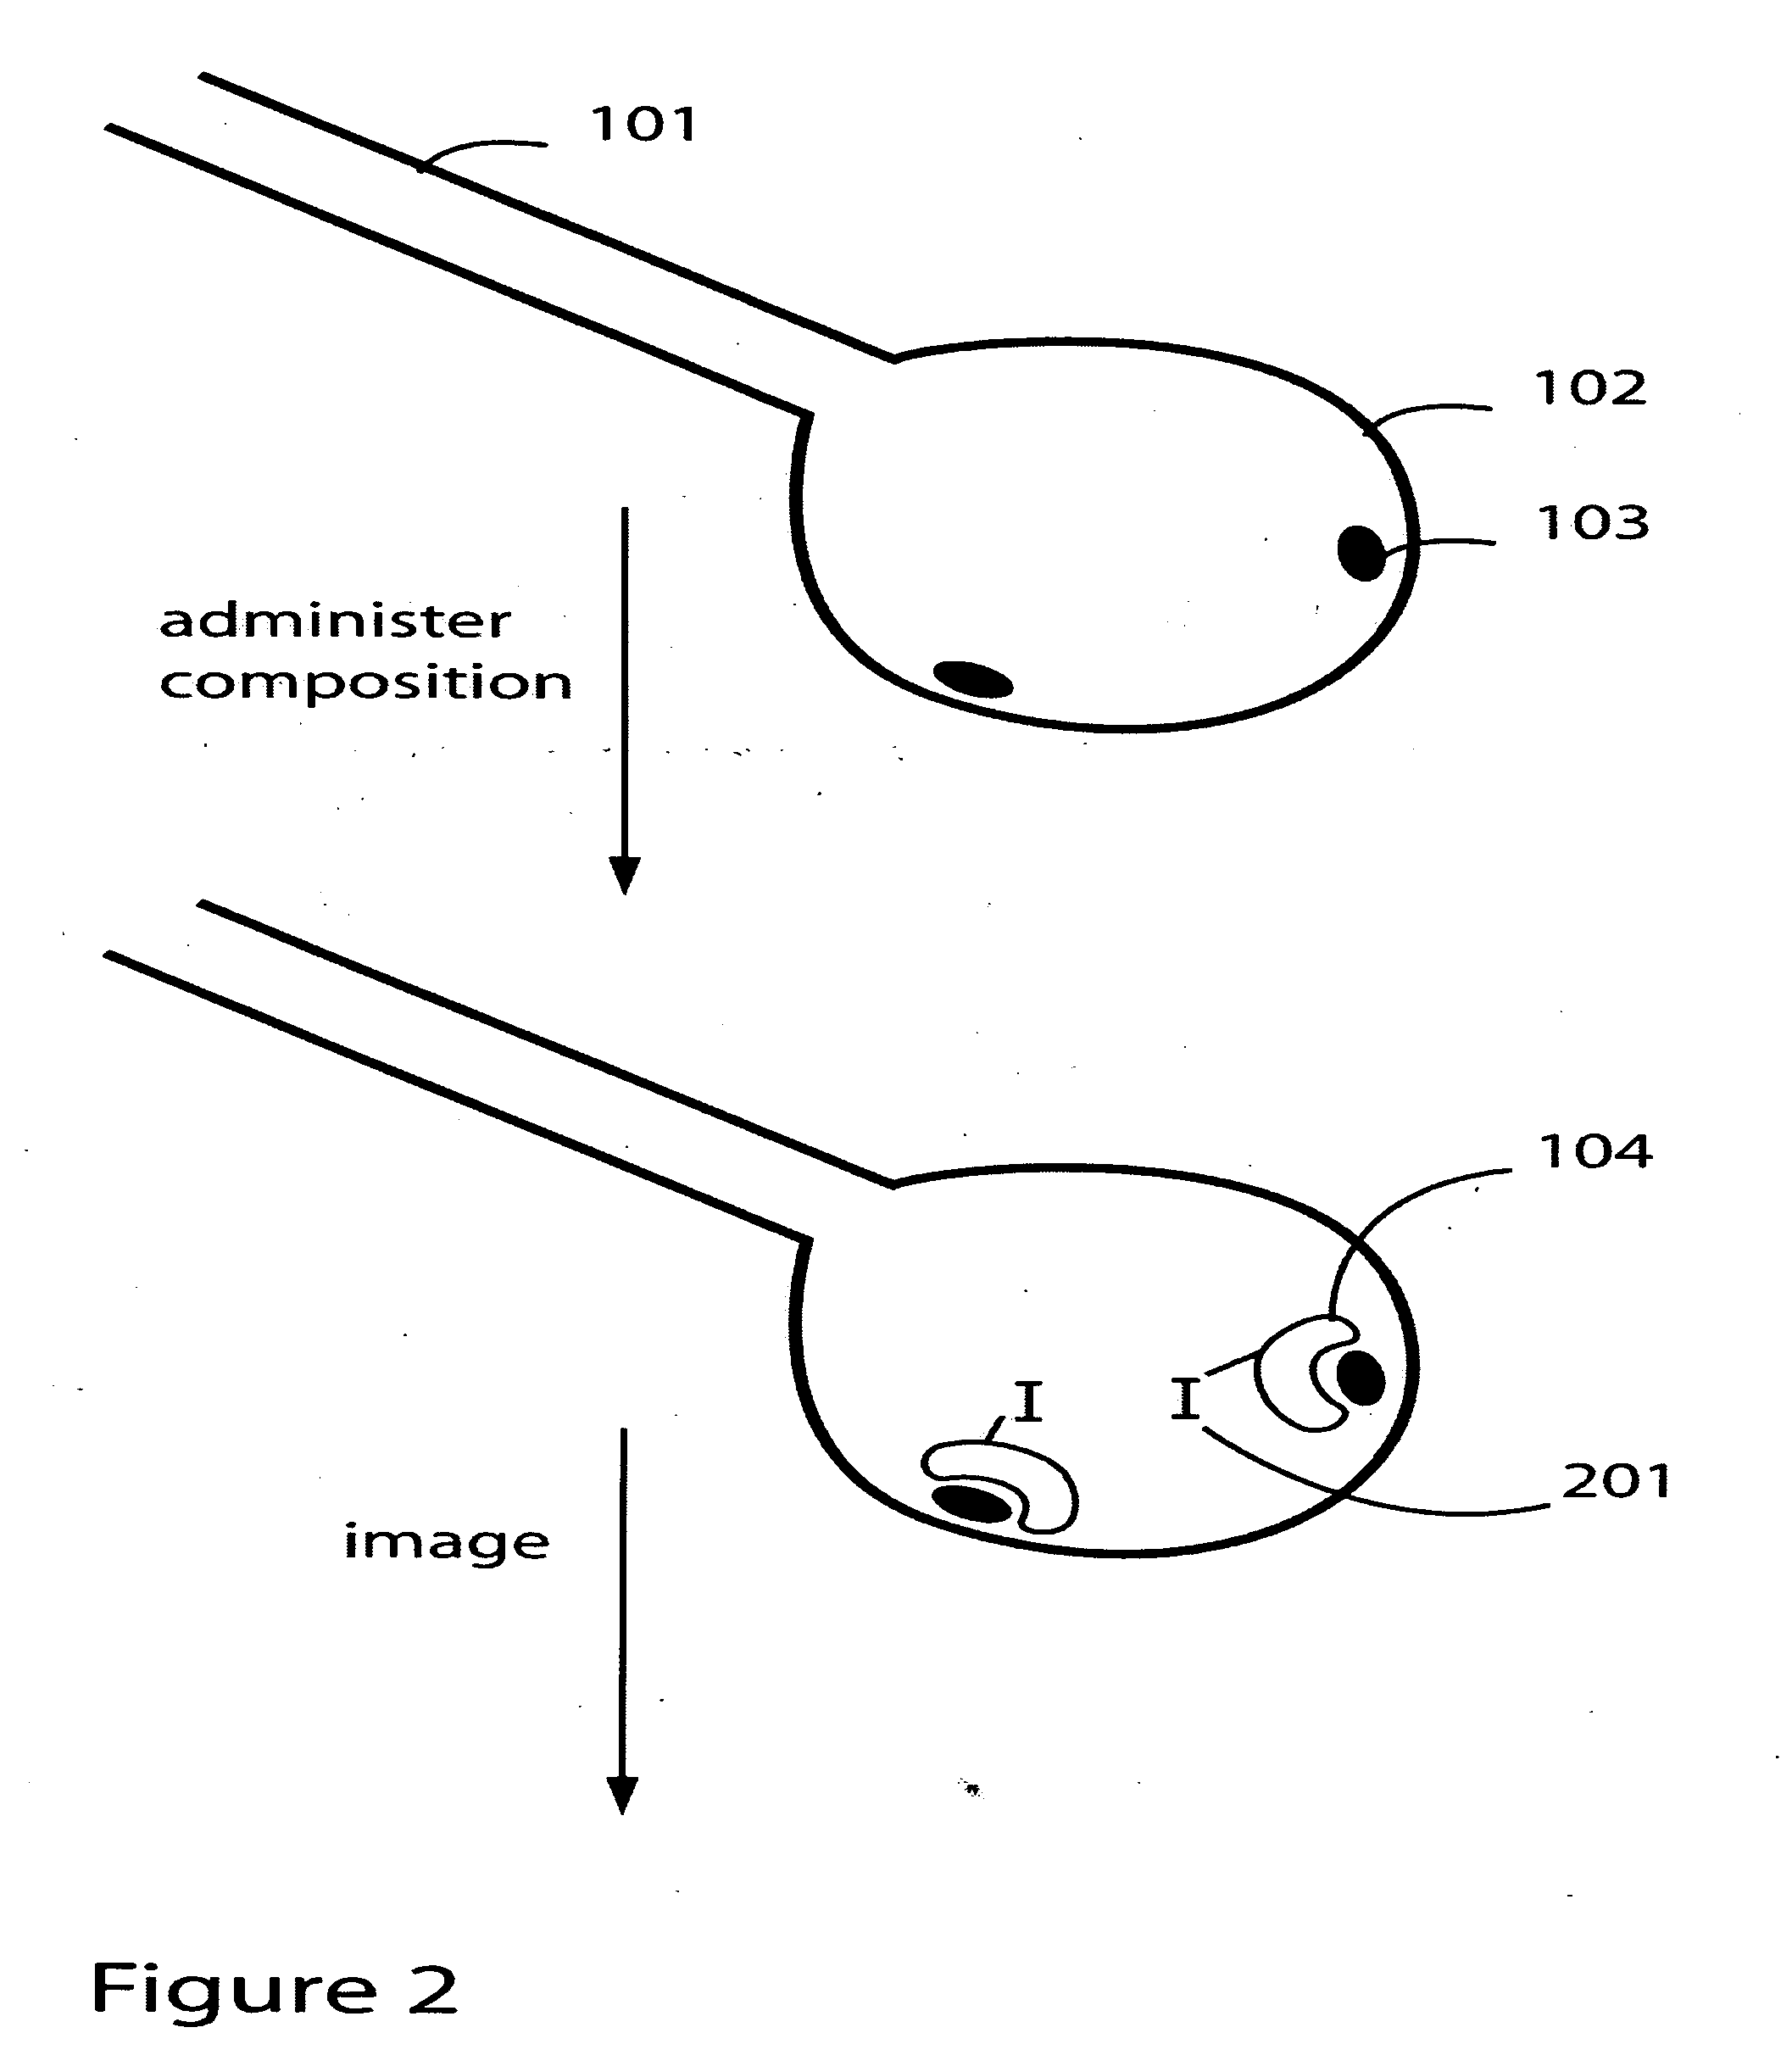 Targeting damaged lung tissue using compositions